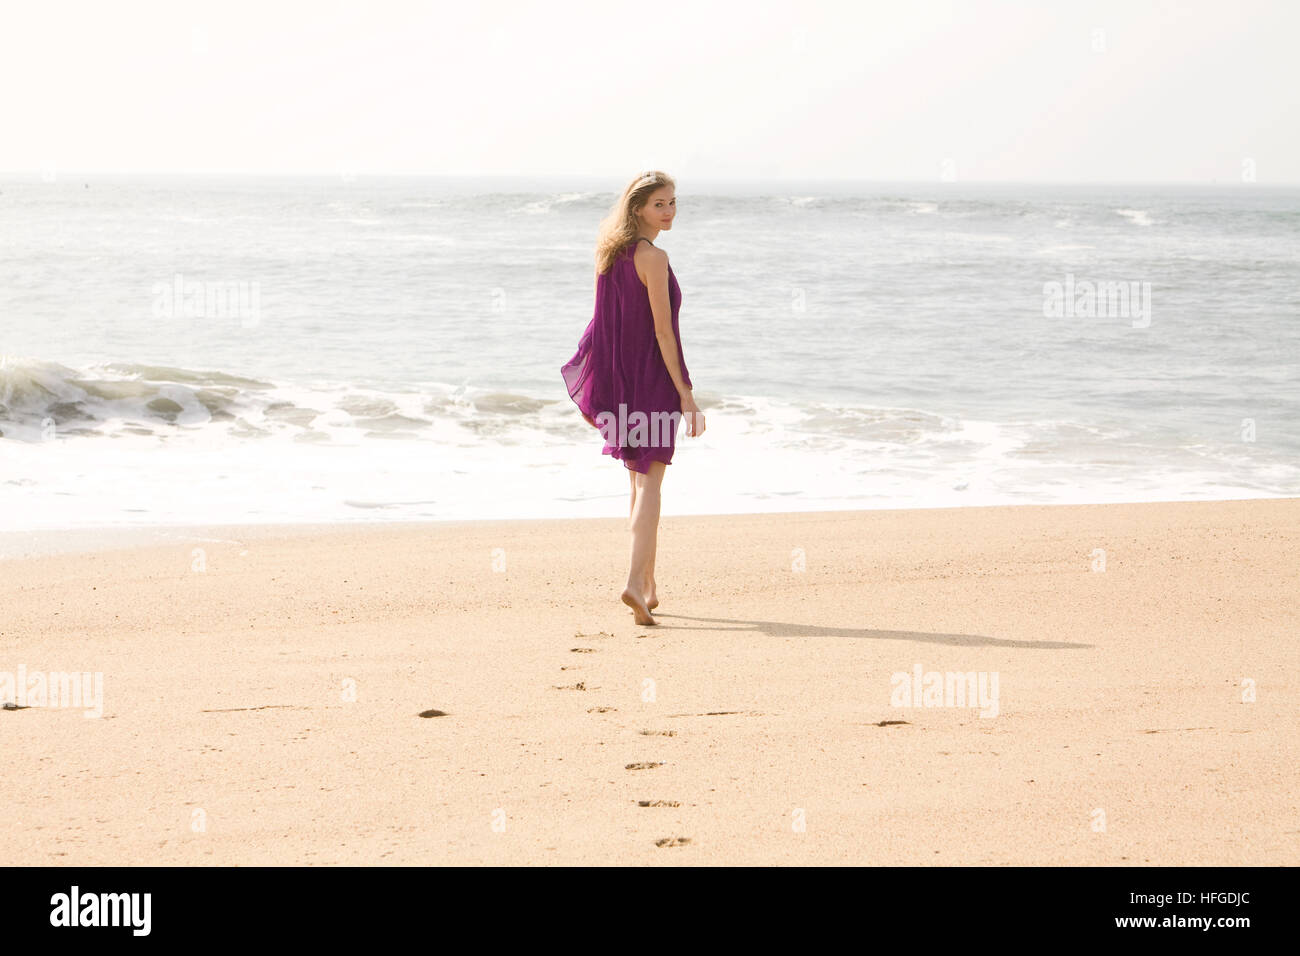 Young woman walking towards the water on a beach leaving footprints in the sand while looking over her shoulder Stock Photo